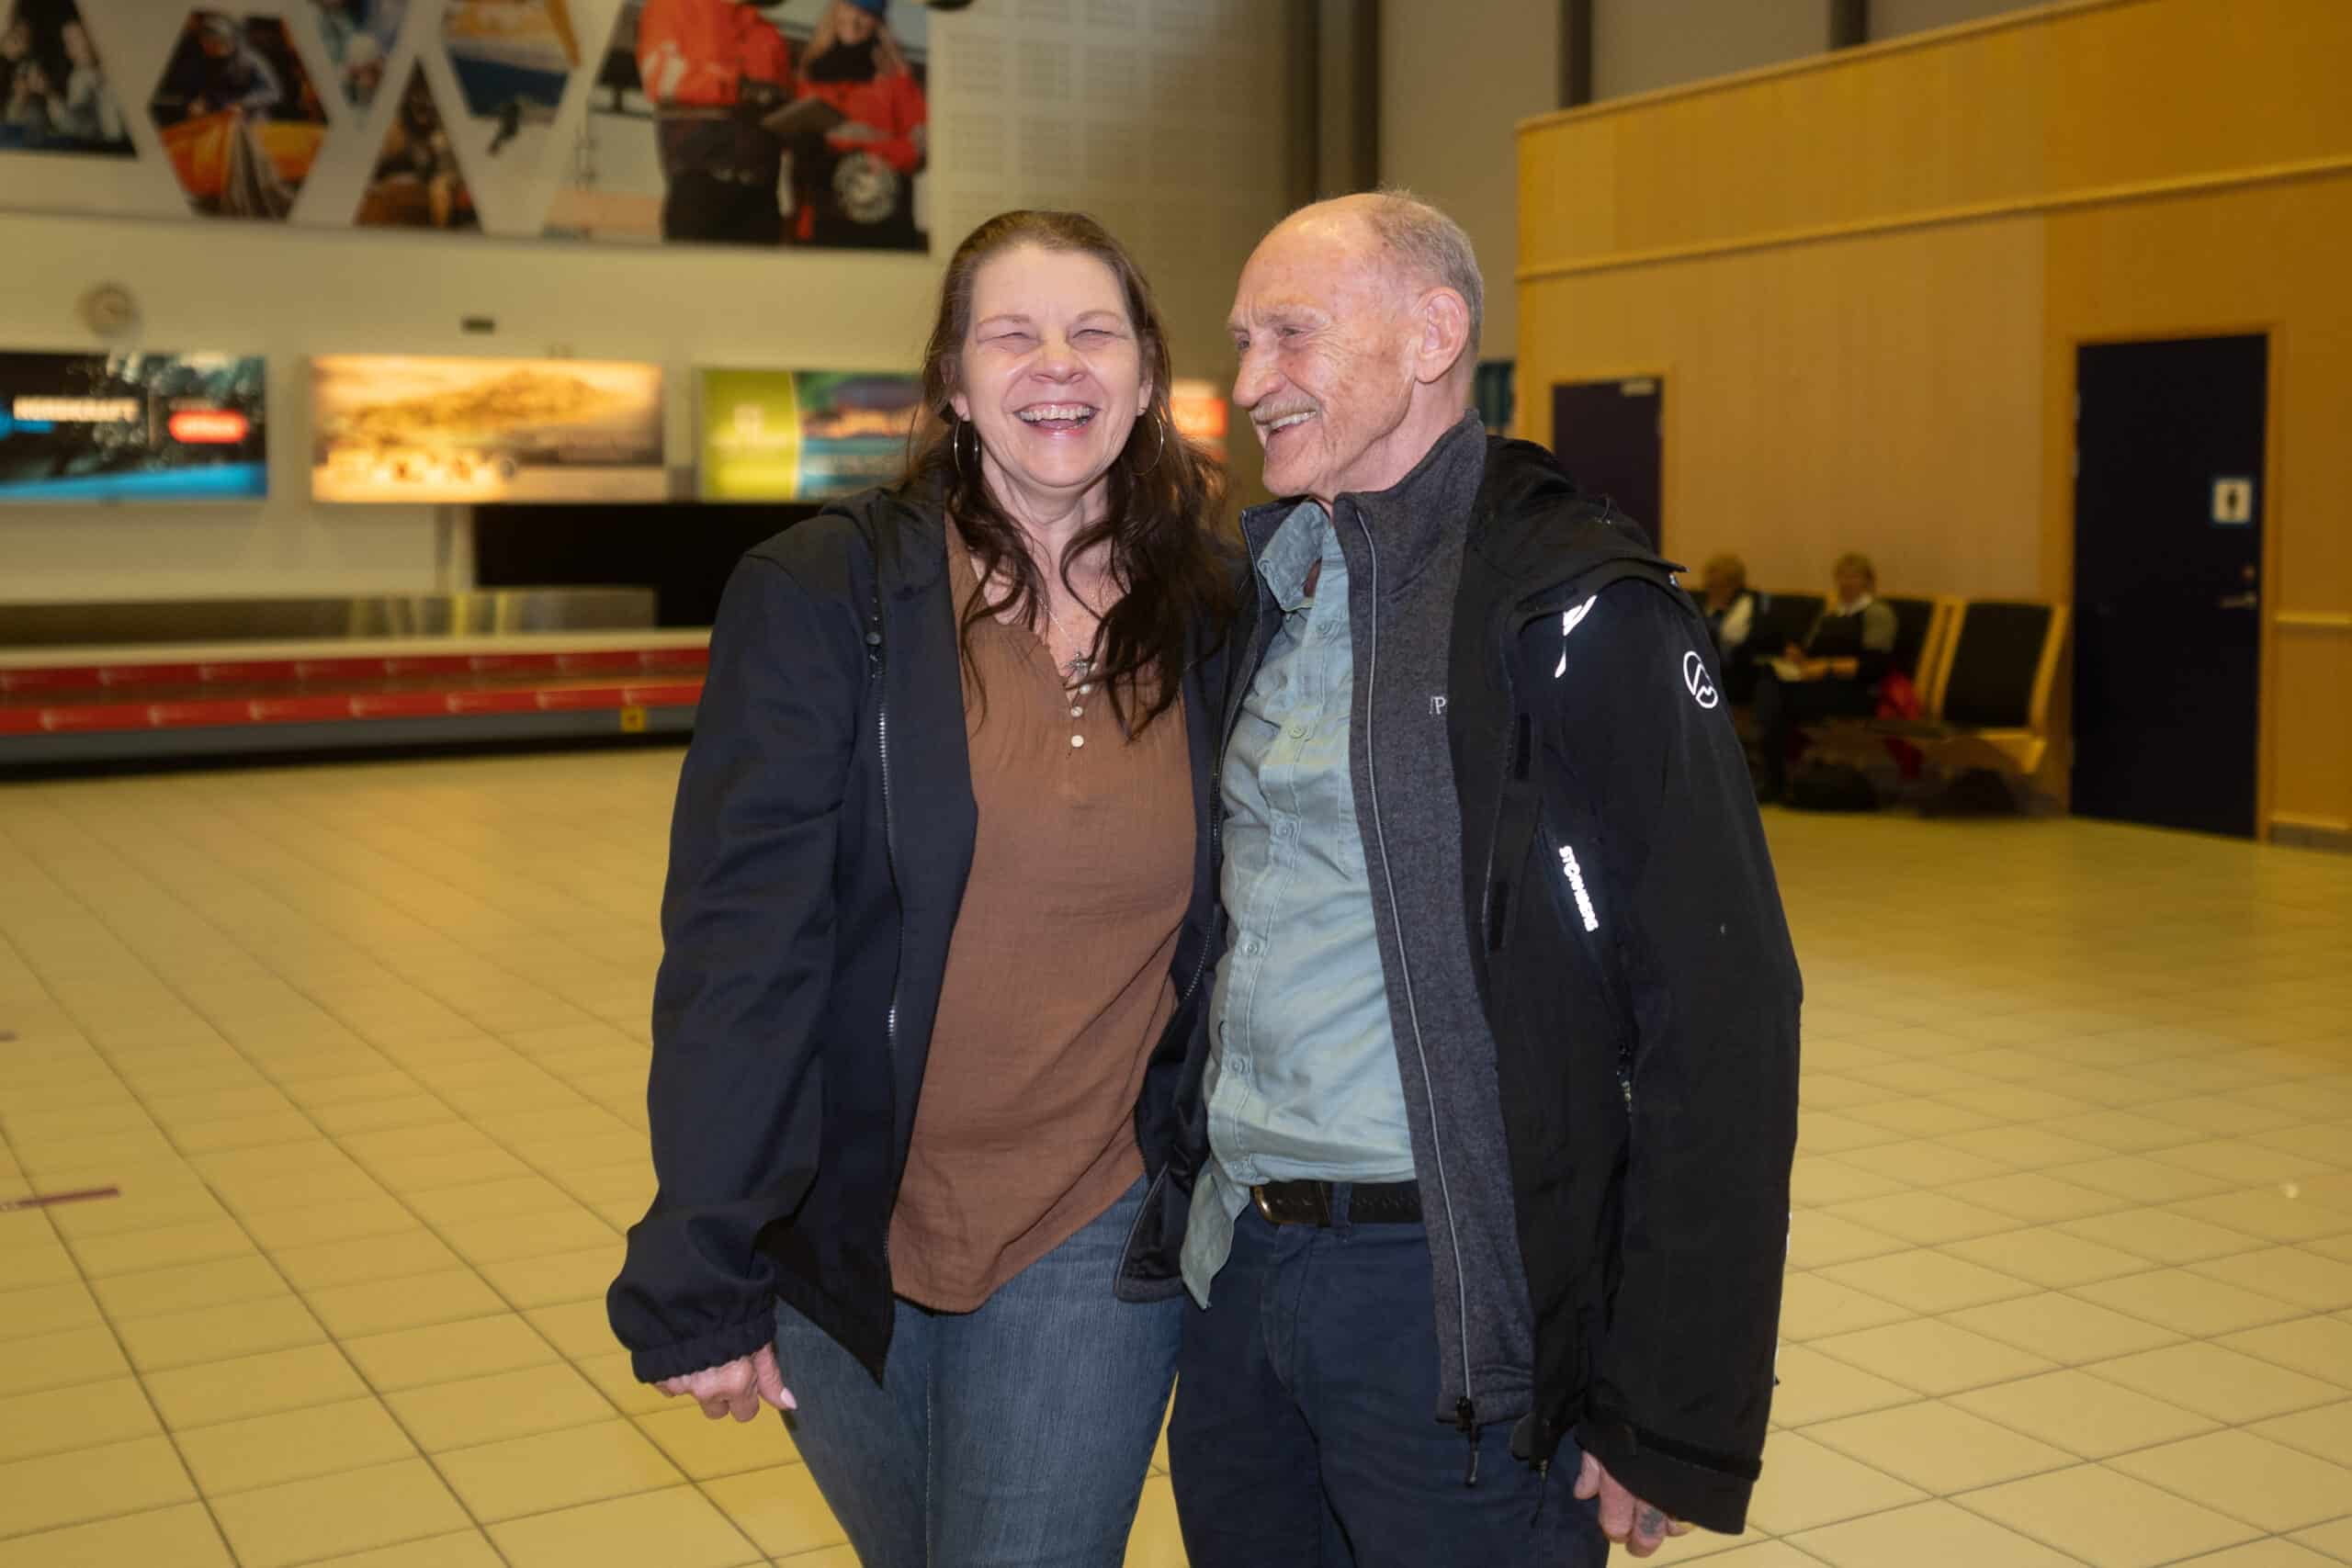 Patty with her father at the airport